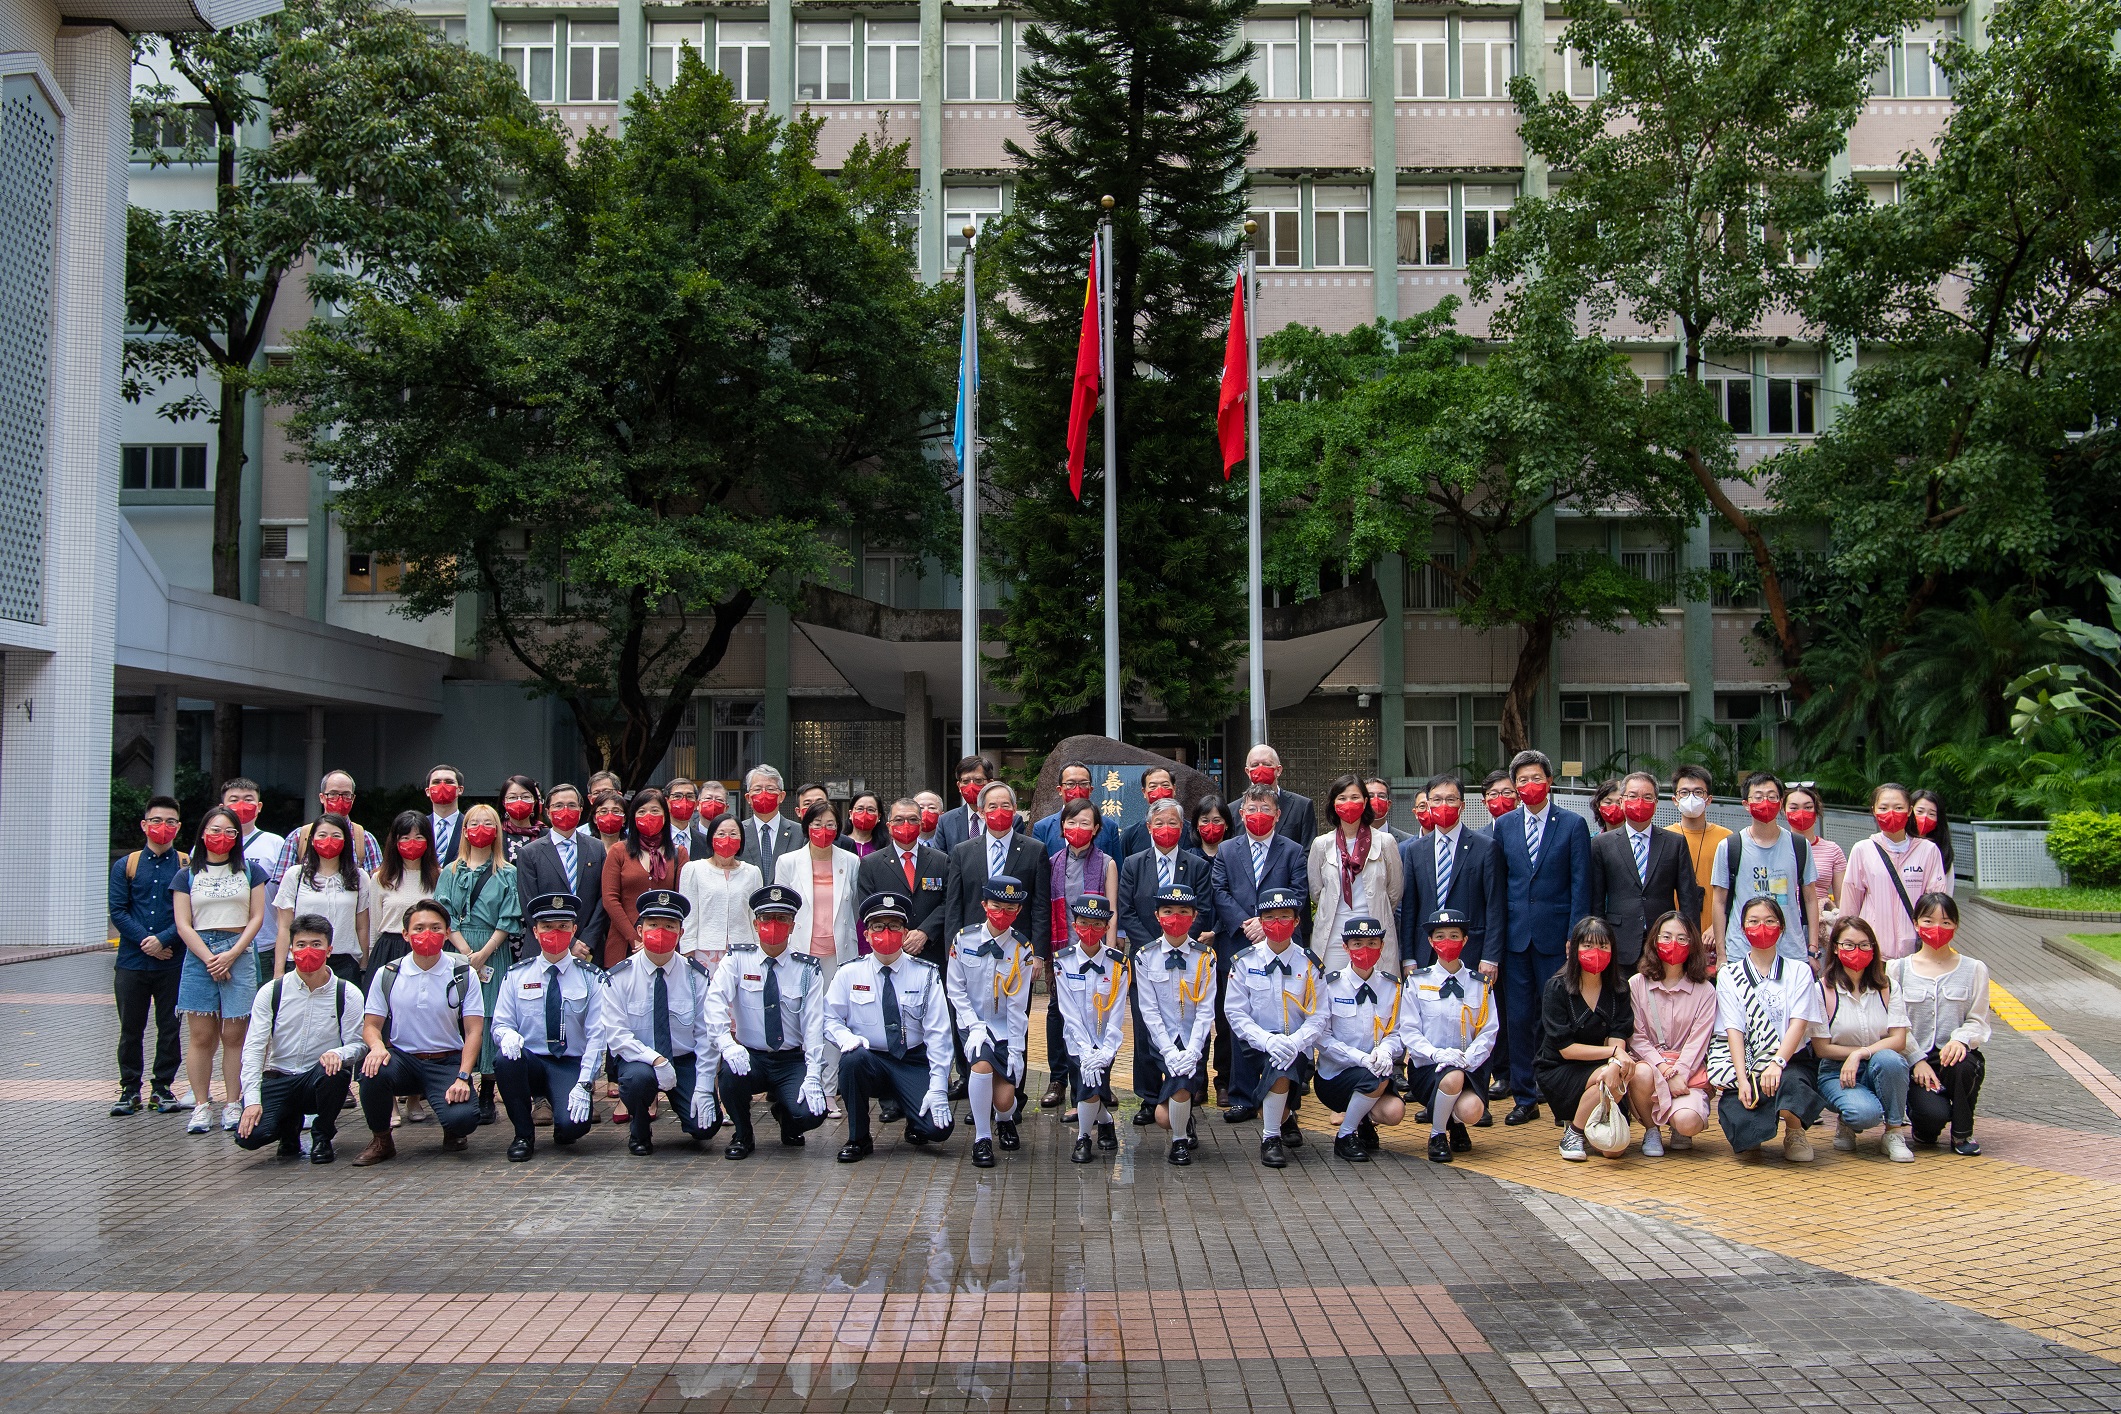 Participants include Council members, senior management team members, staff and students of HKBU attend the ceremony.